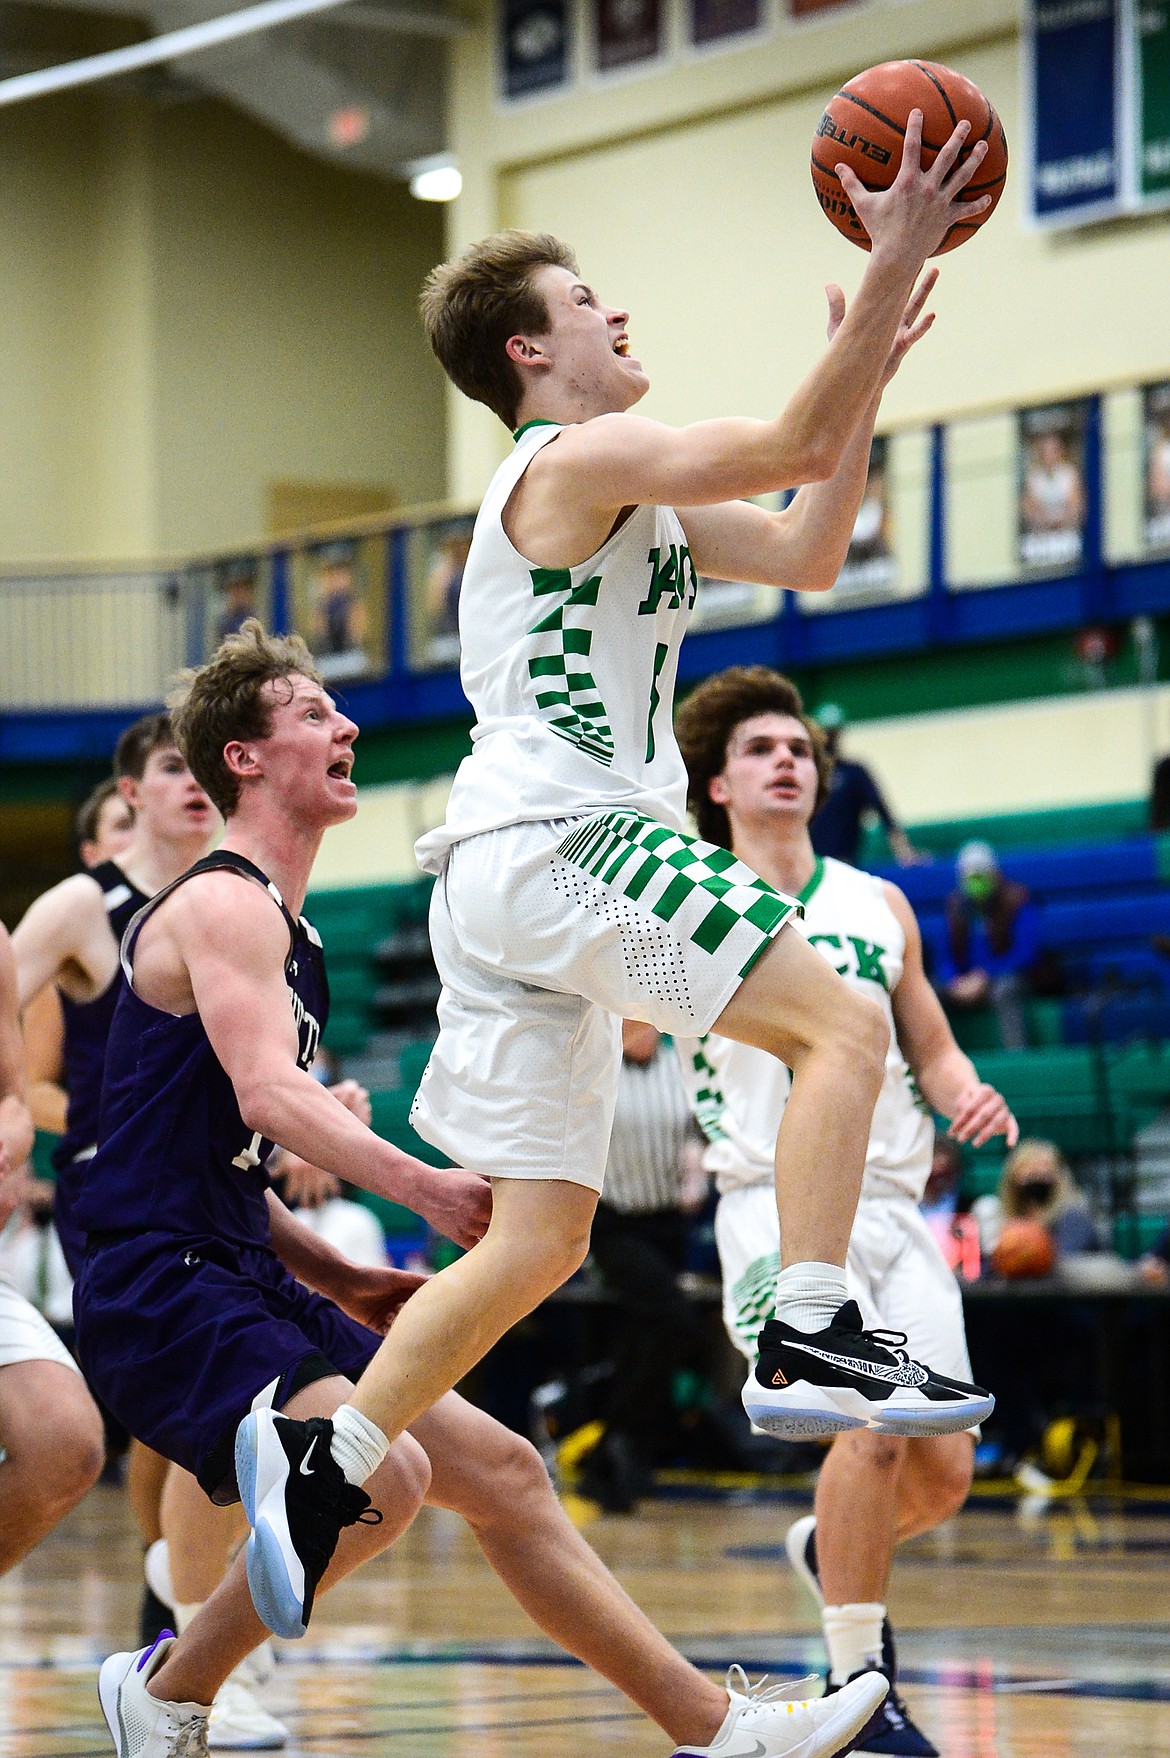 Glacier's Connor Sullivan (5) drives to the basket against Butte in the second quarter at Glacier High School on Thursday. (Casey Kreider/Daily Inter Lake)